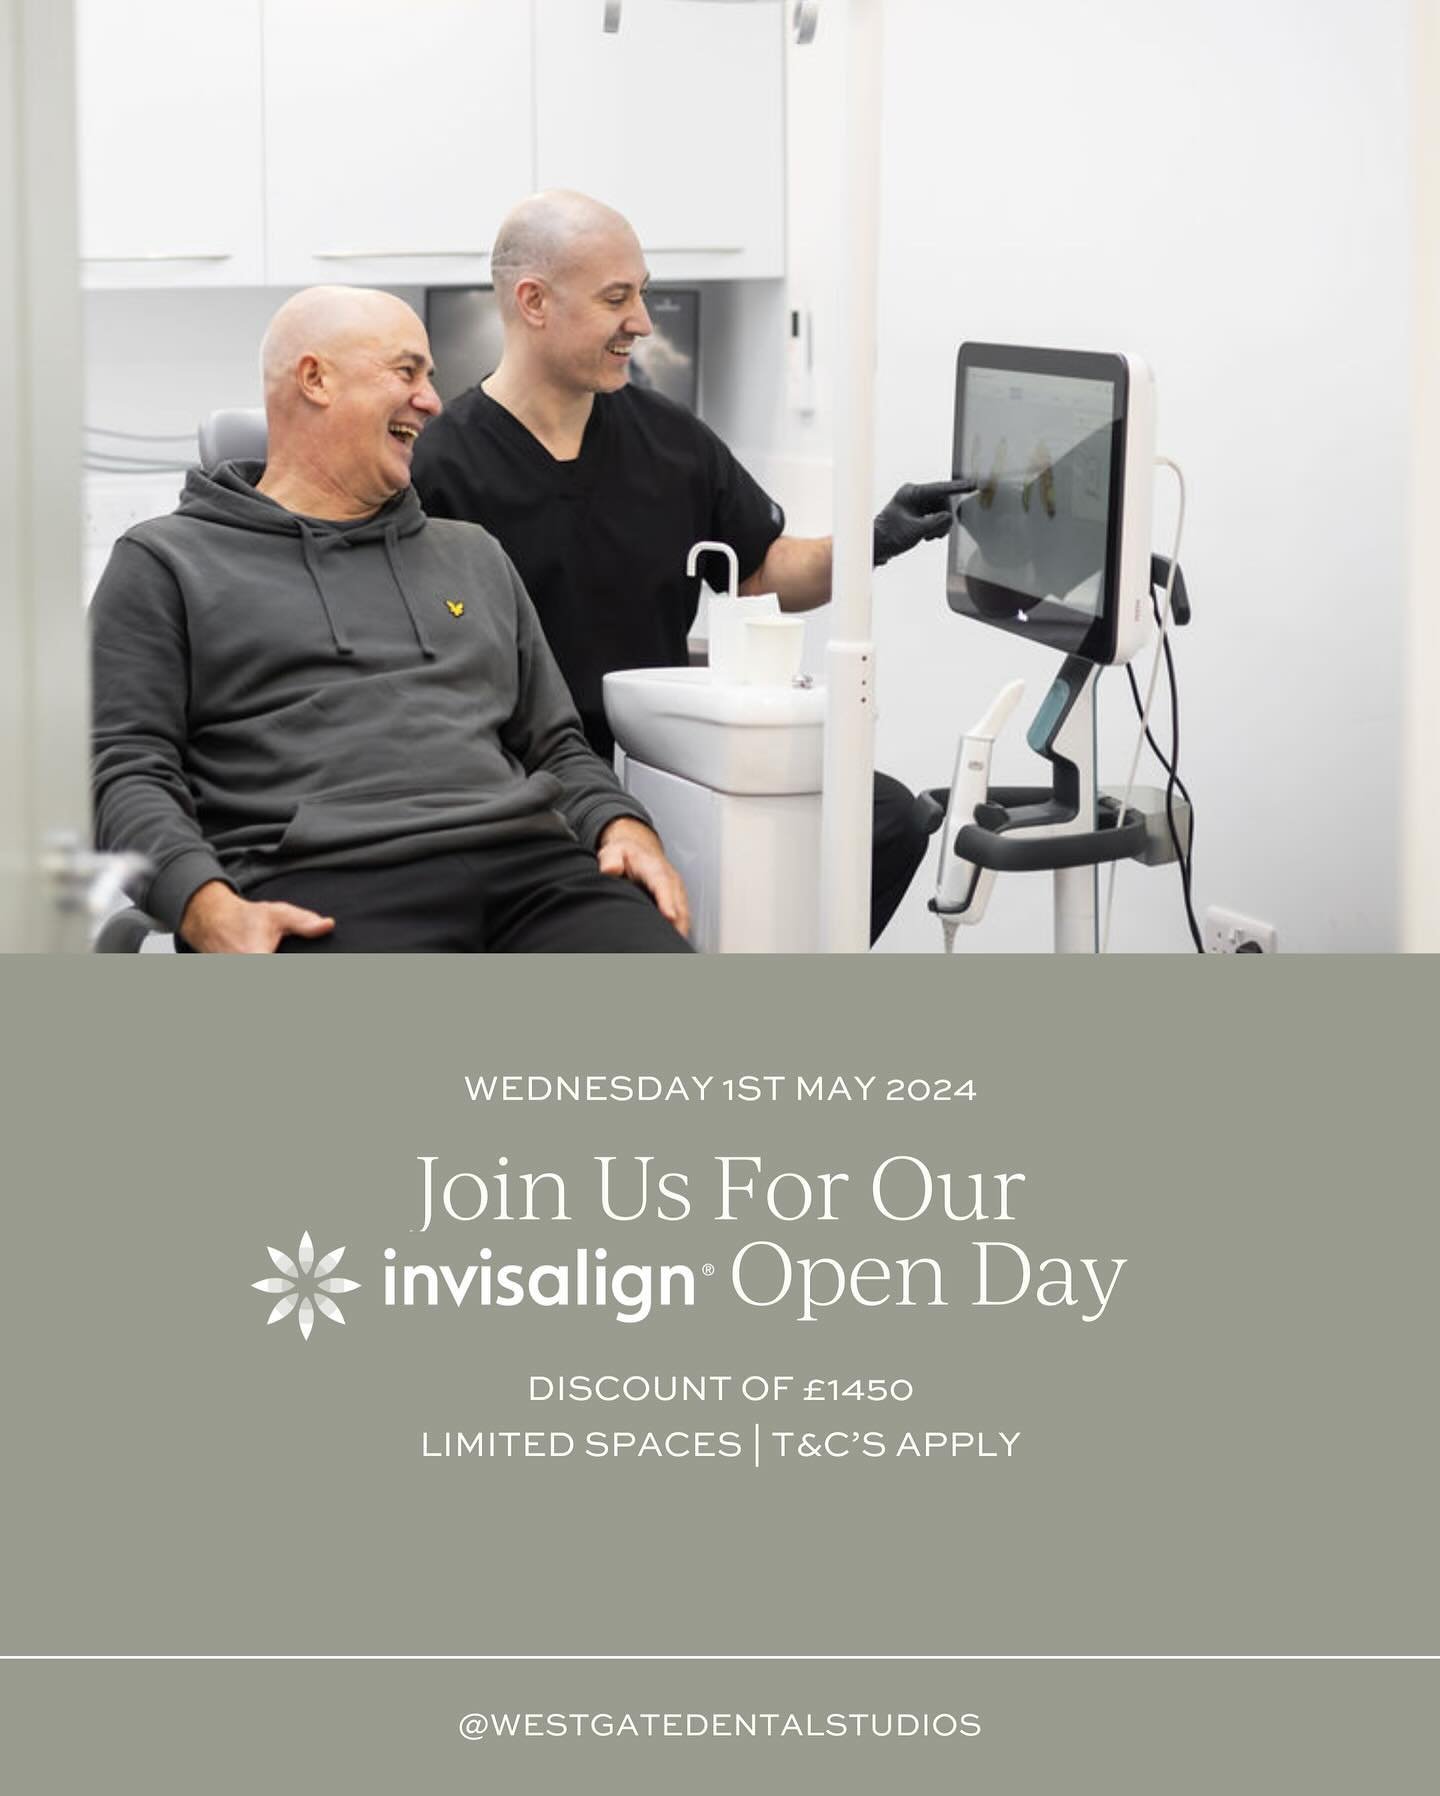 🎉 We are hosting an exclusive Invisalign&reg; Open Day where we are giving away &pound;1450 in discounts! 

💎 Join us on 1st May for an Invisalign&reg; consultation and smile simulation to see what your dream smile could look like 🤩

A discount of